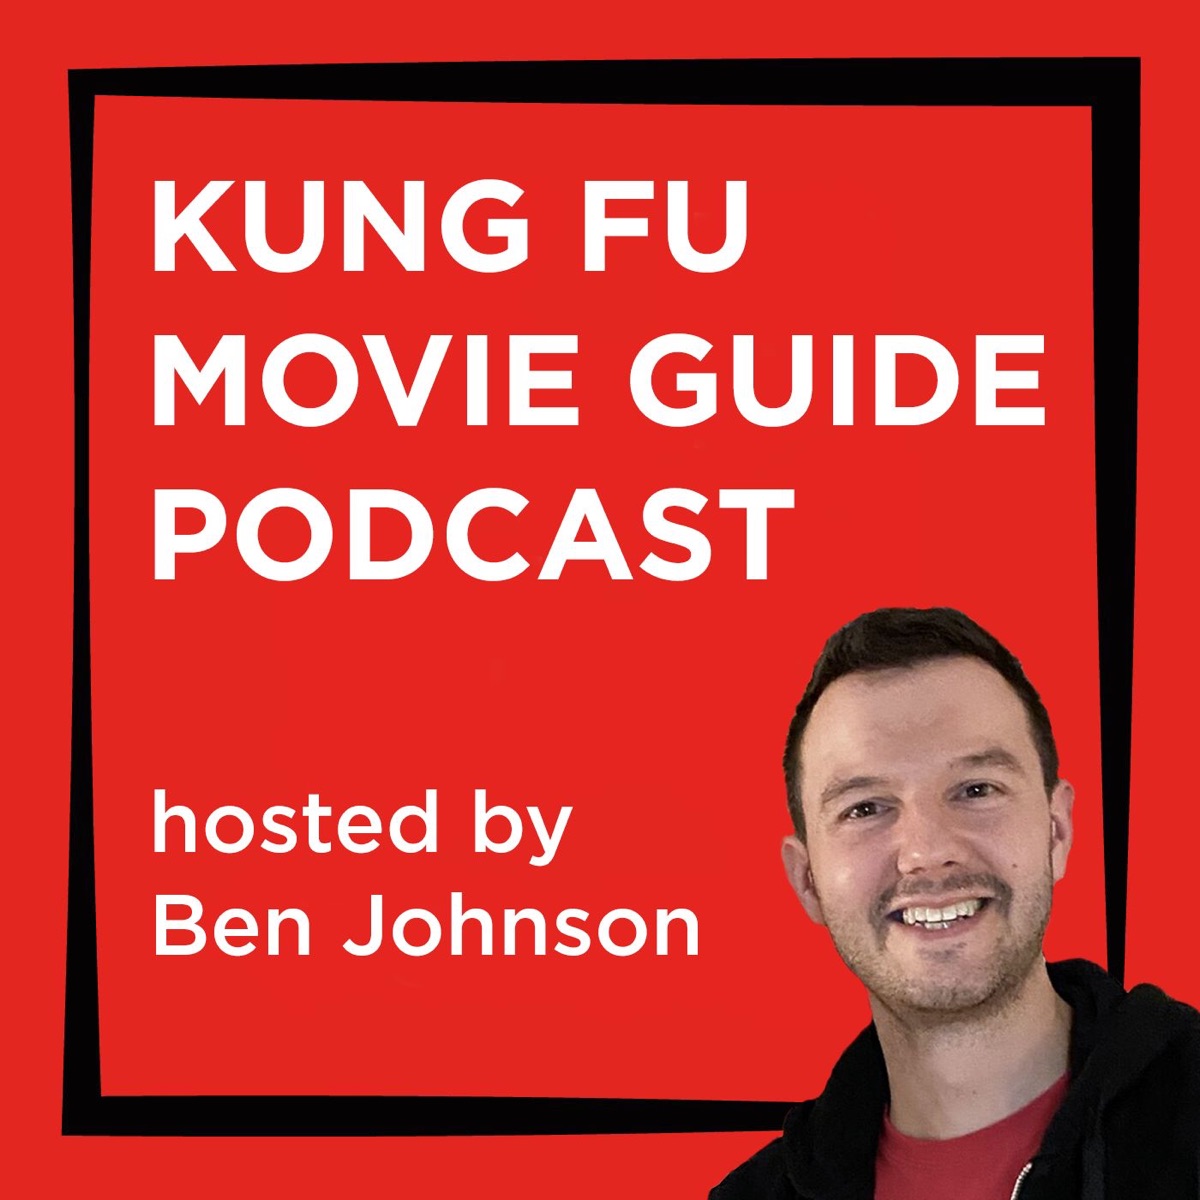 Kung Fu Movie Guide Podcast – Podcast picture